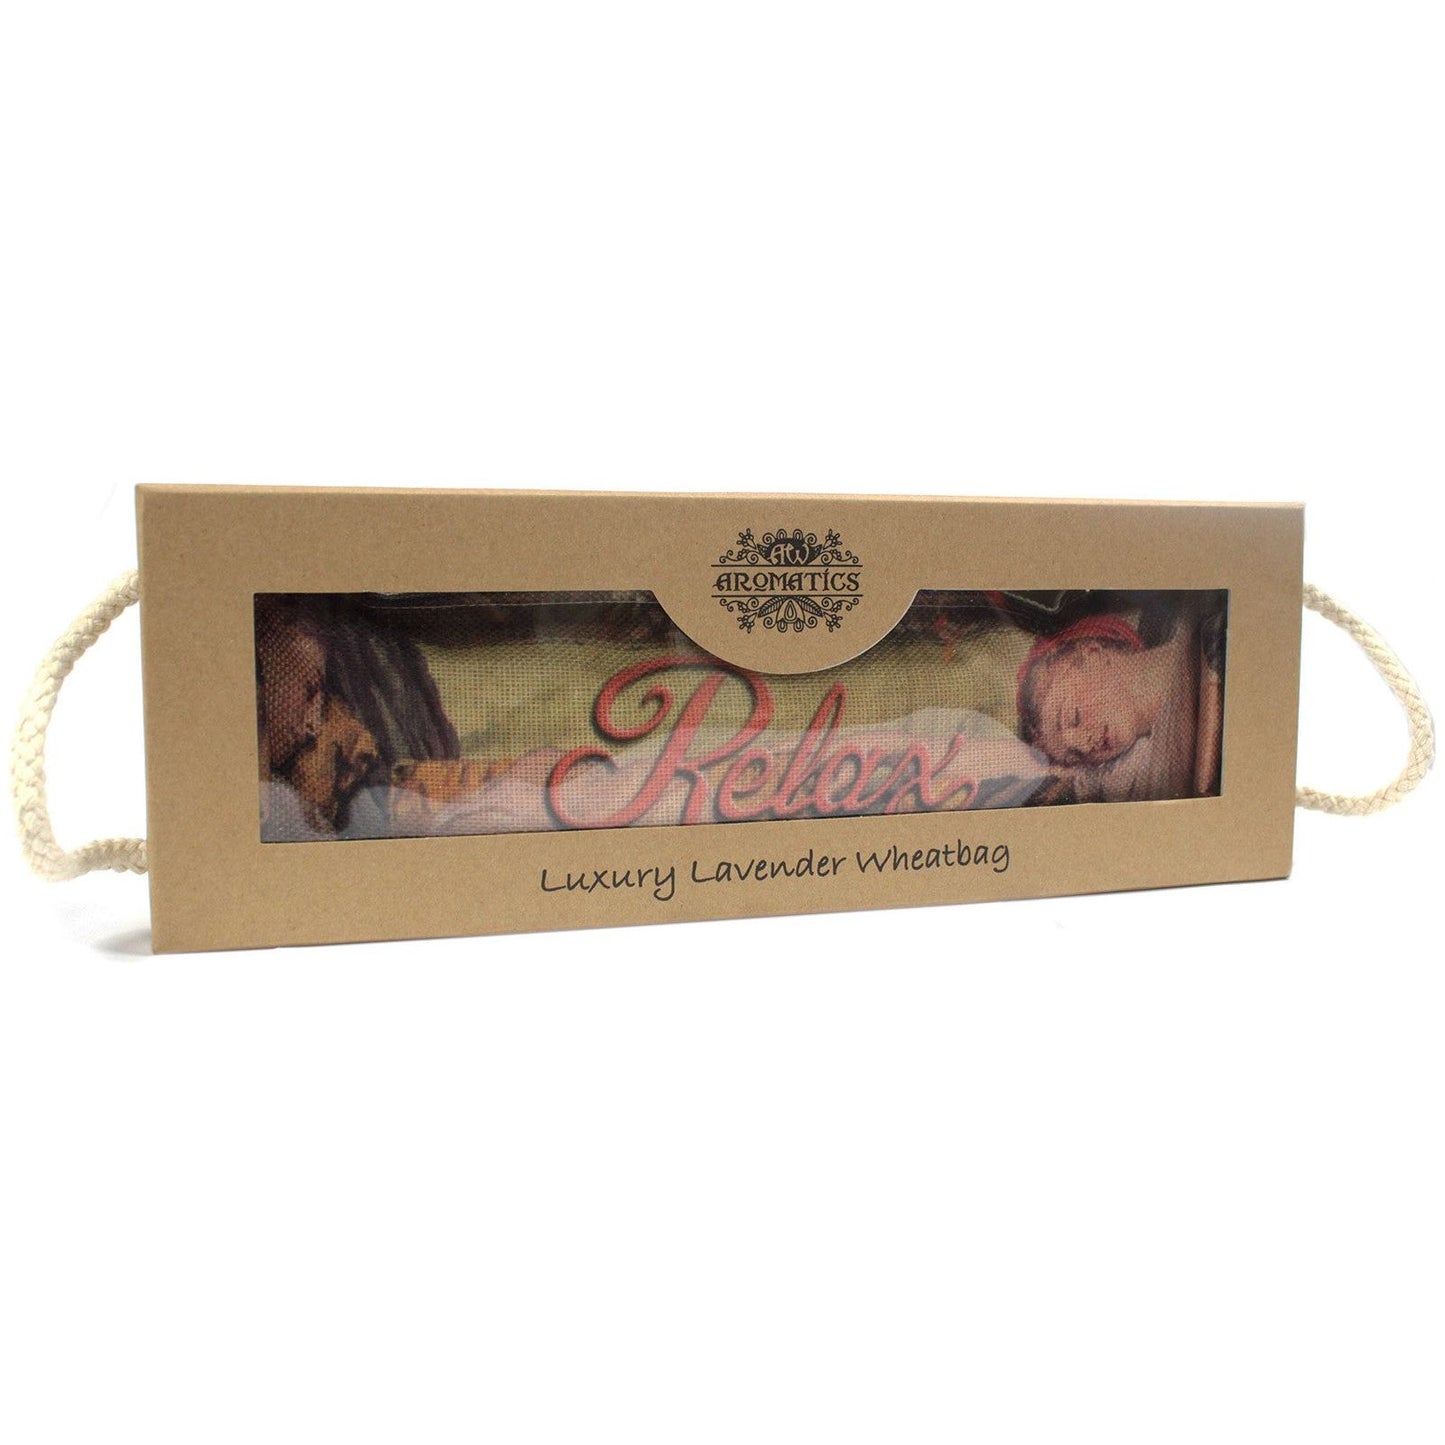 Luxury Lavender Wheat Bag in Gift Box - Sleeping RELAX - Ashton and Finch